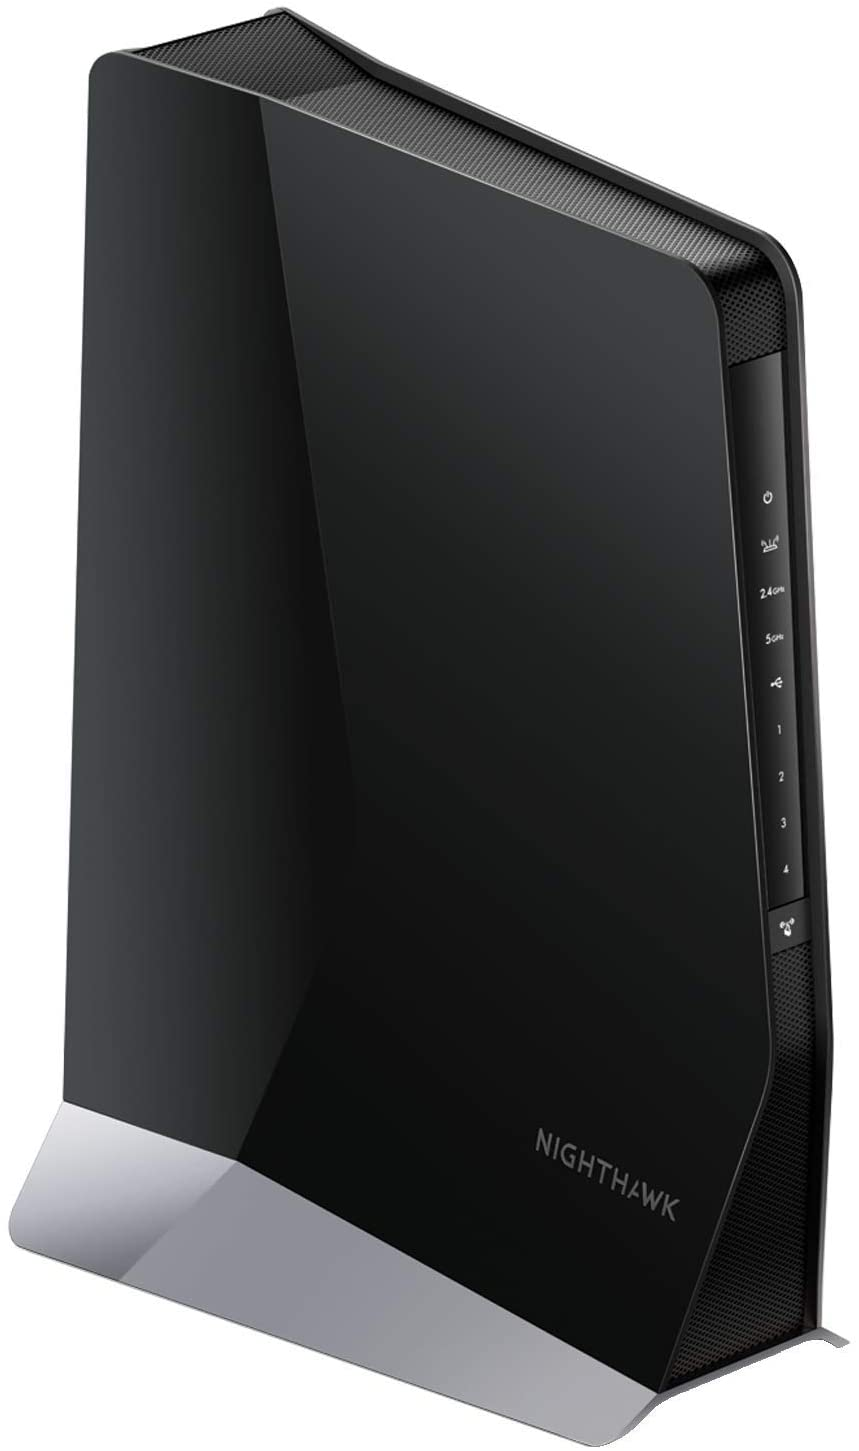 NETGEAR Nighthawk WiFi 6 Mesh Range Extender EAX80 - Add up to 2,500 sq. ft. and 30+ devices with AX6000 Dual-Band Wireless Signal Booster & Repeater (up to 6Gbps speed) $149.99